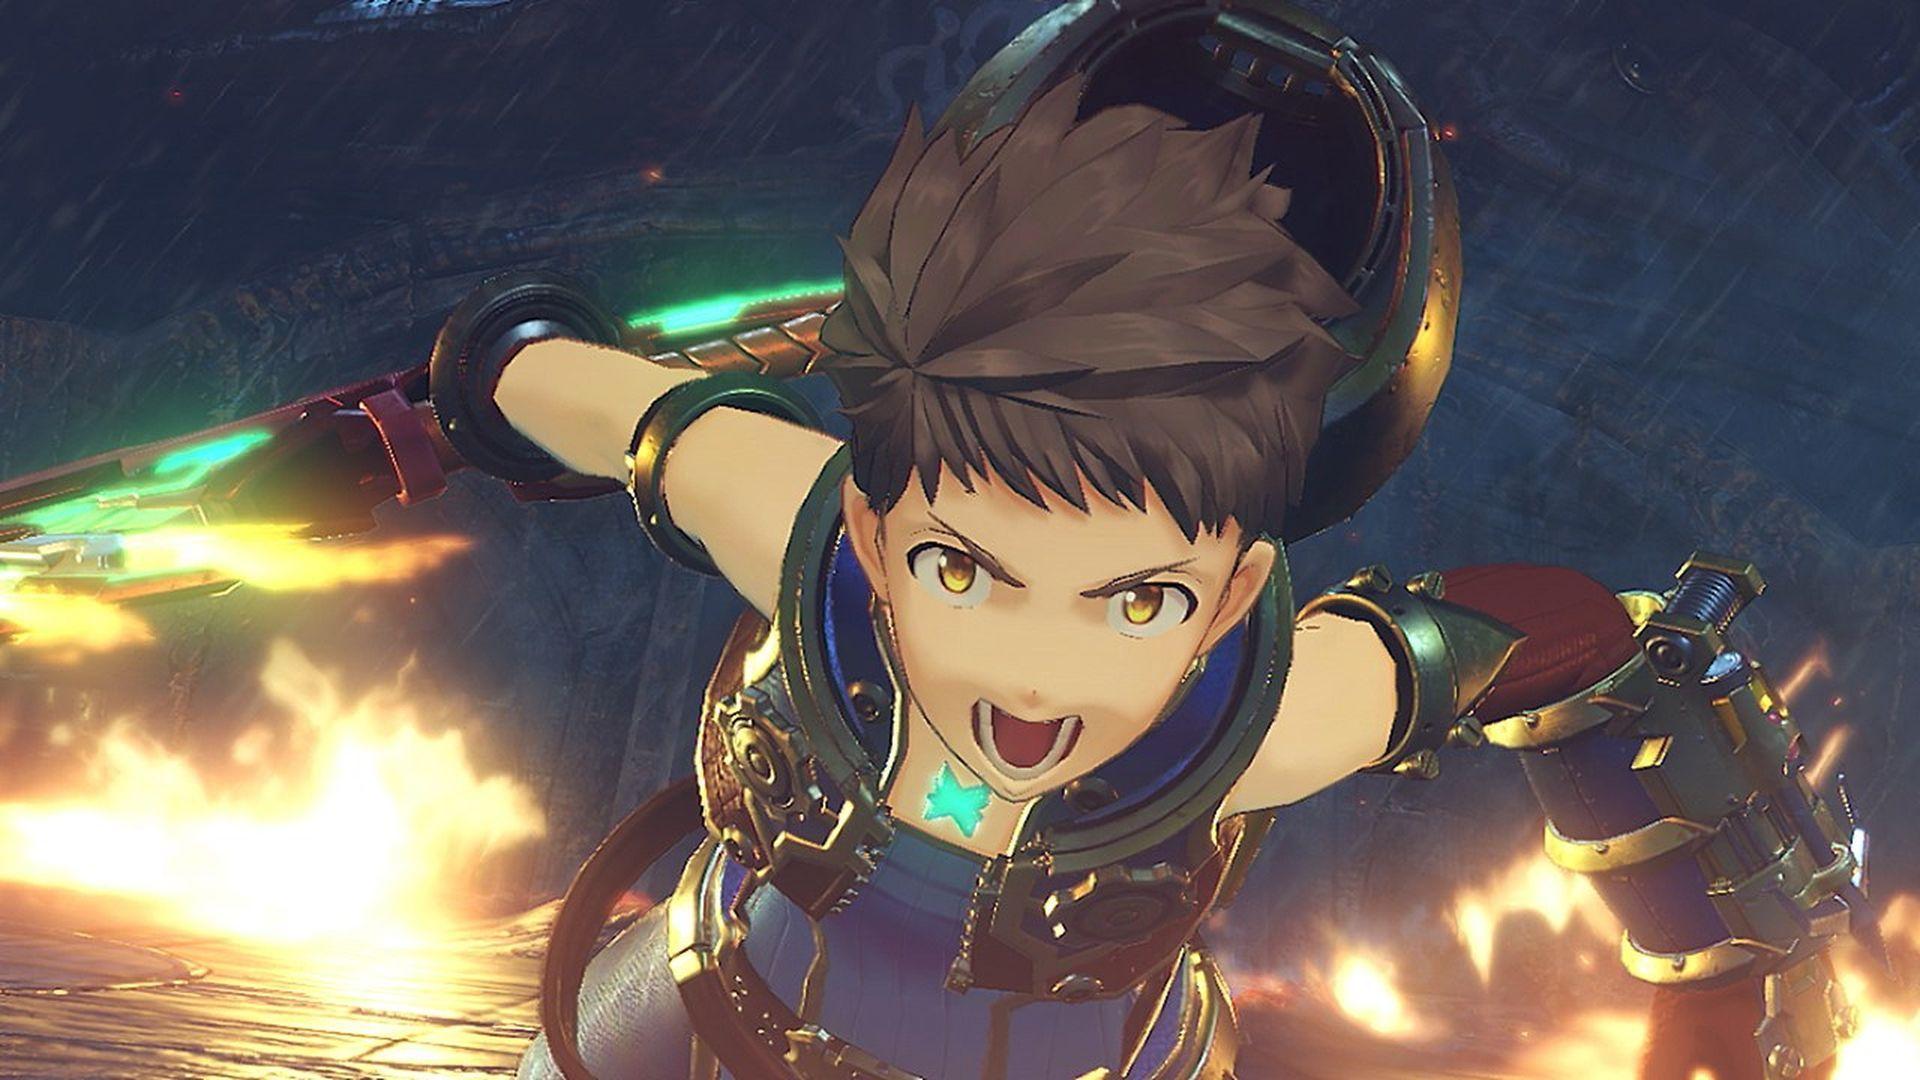 Xenoblade Chronicles 2: Torna The Golden Country DLC out September